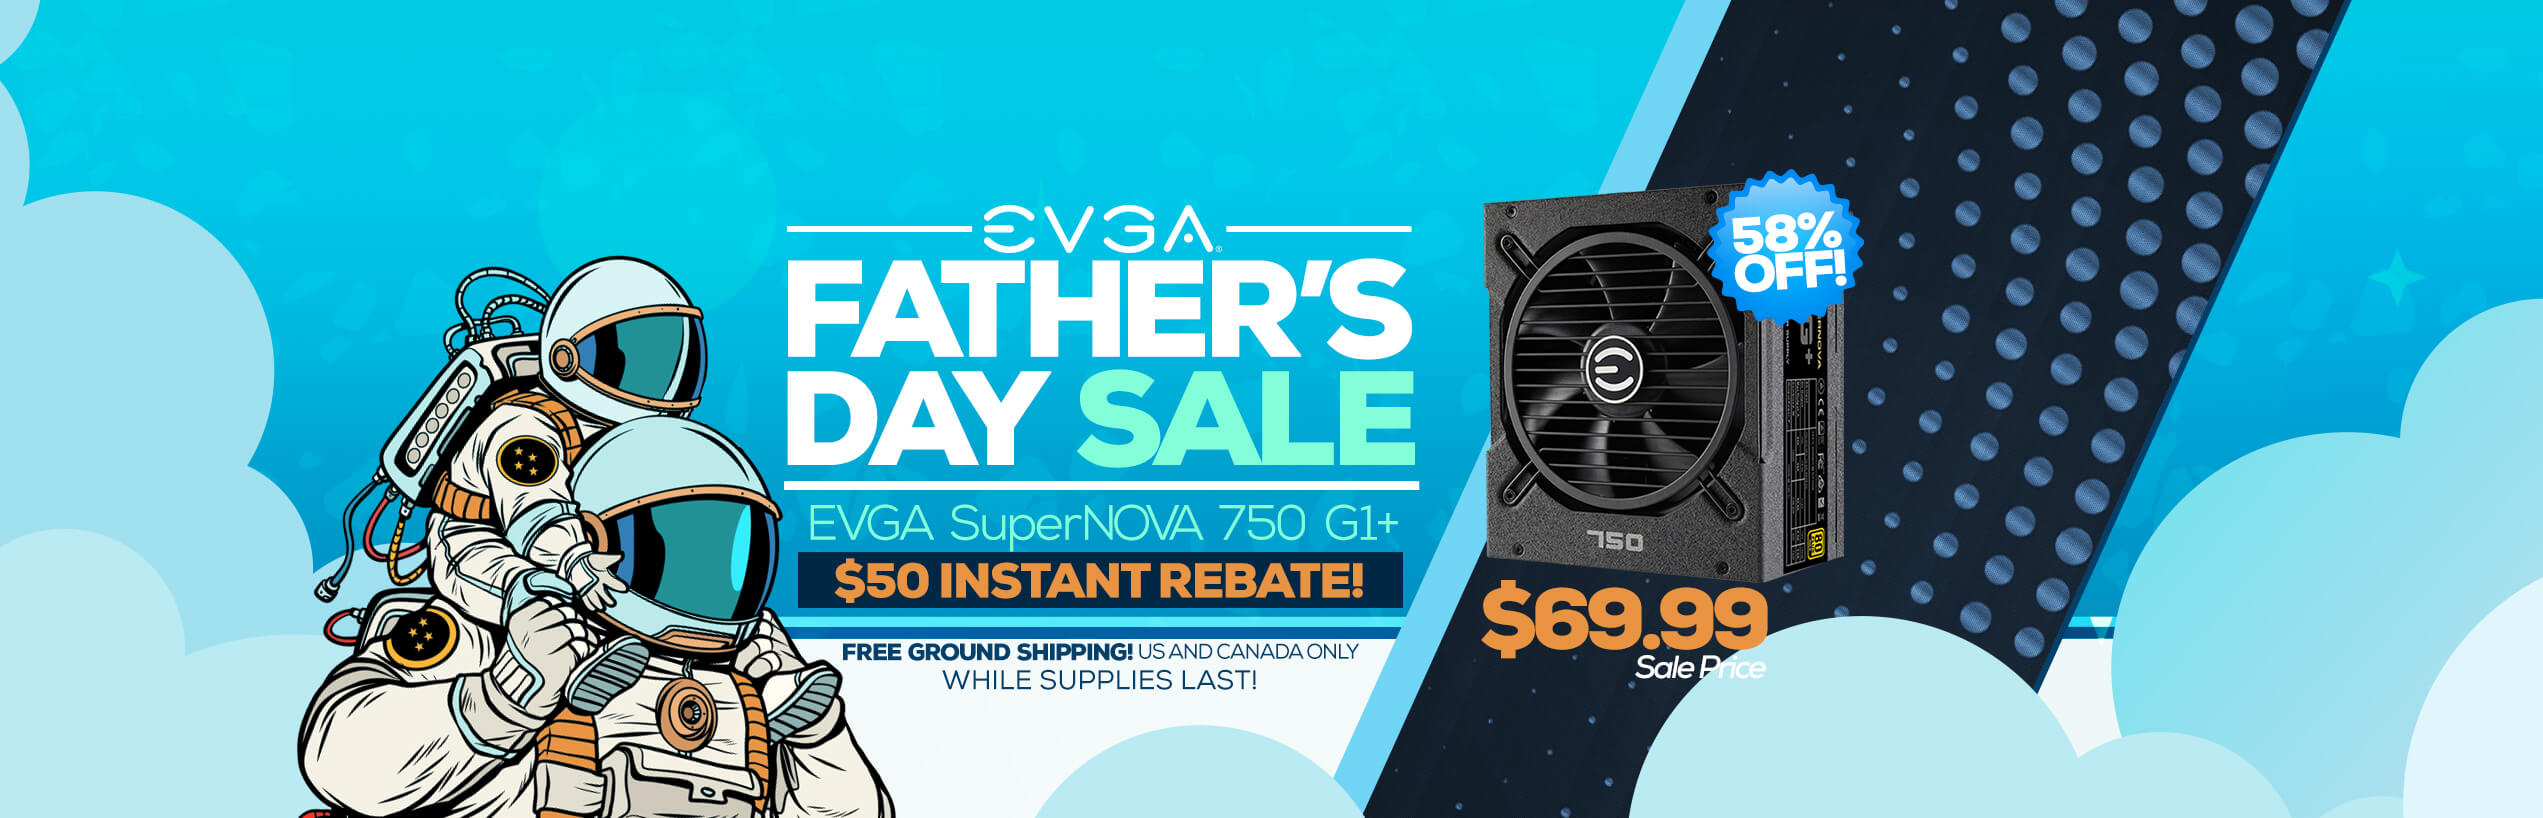 EVGA Father's Day Sale